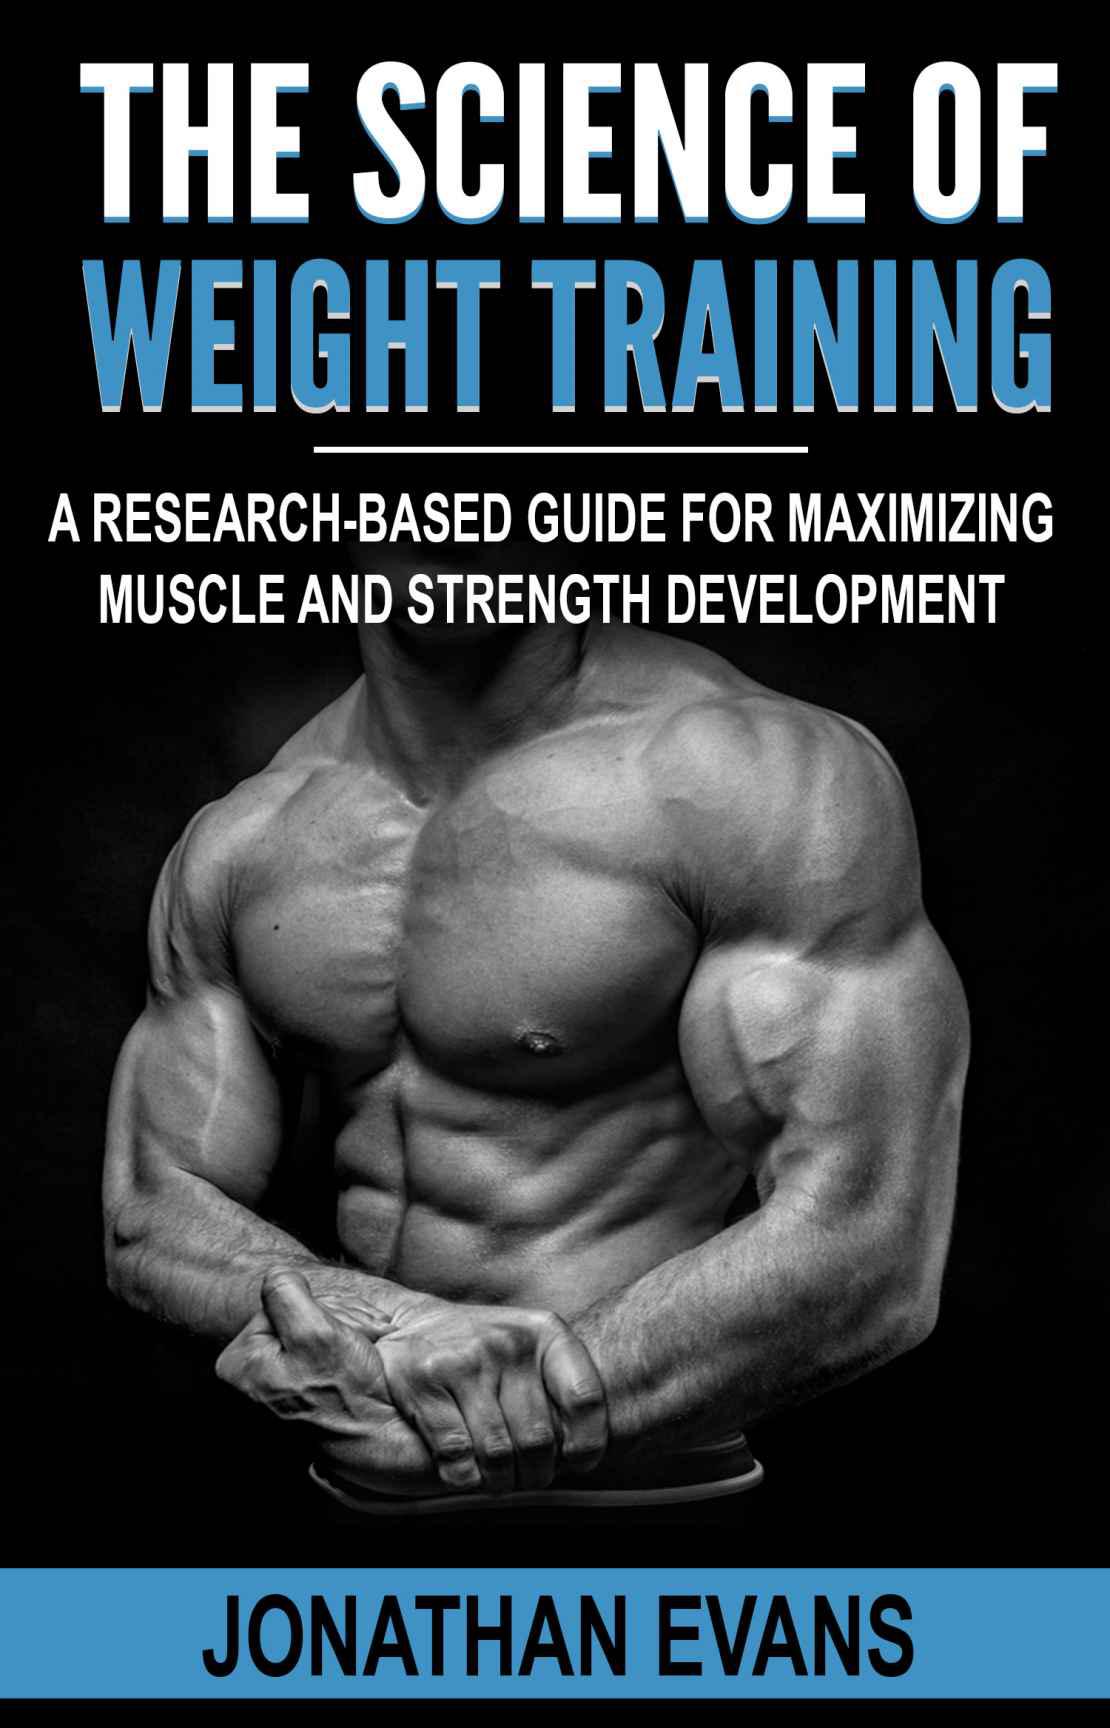 FREE: The Science of Weight Training: A Research-Based Guide for Maximizing Muscle and Strength Development by Jonathan Evans